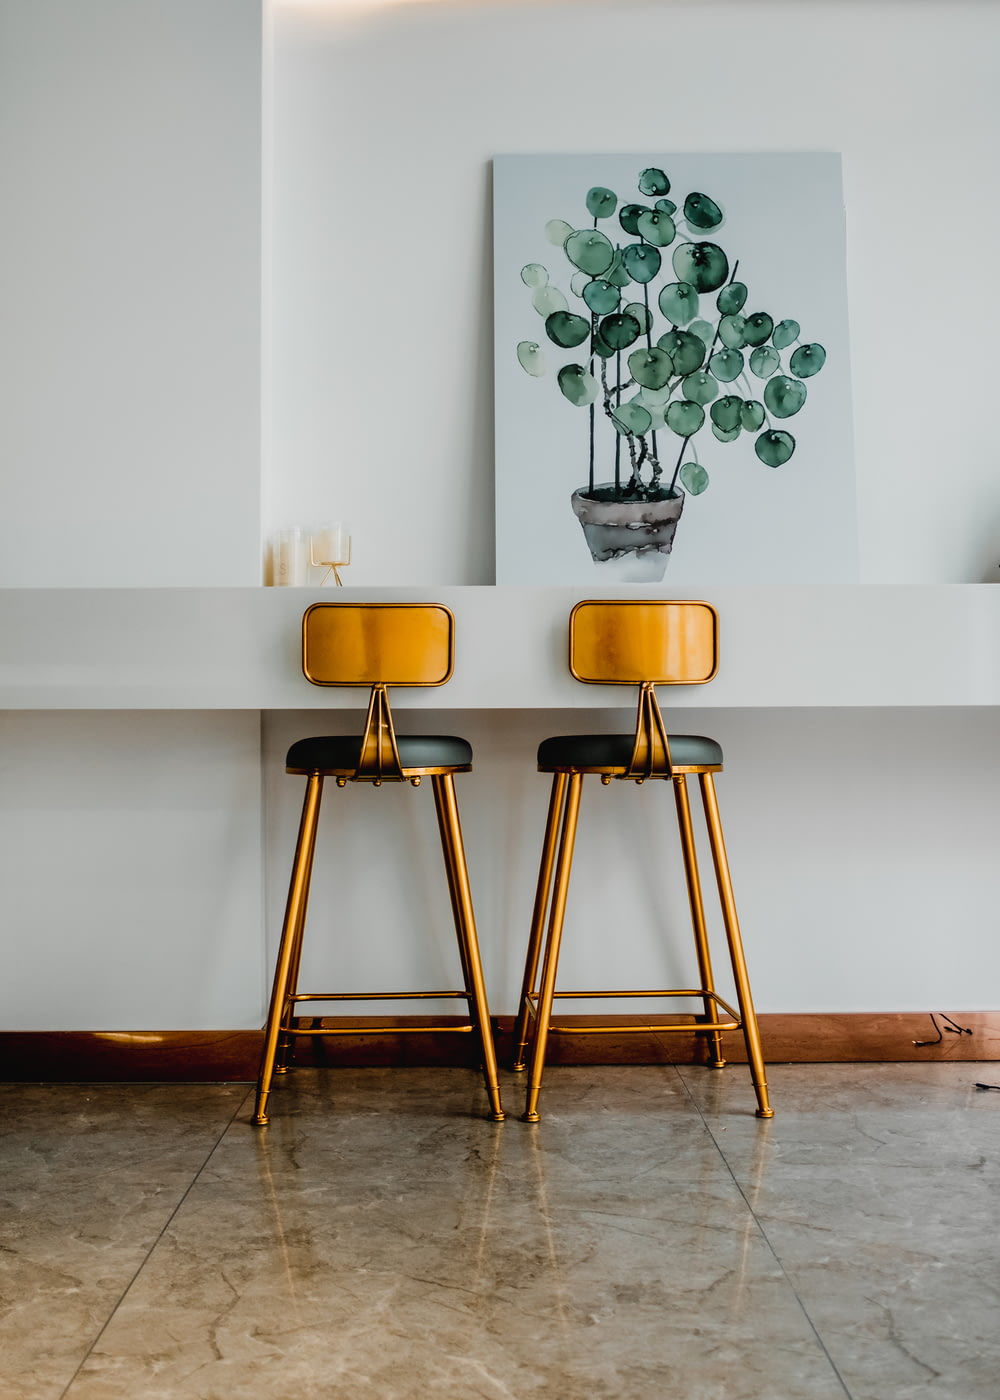 two yellow stools in front of a painting on a wall